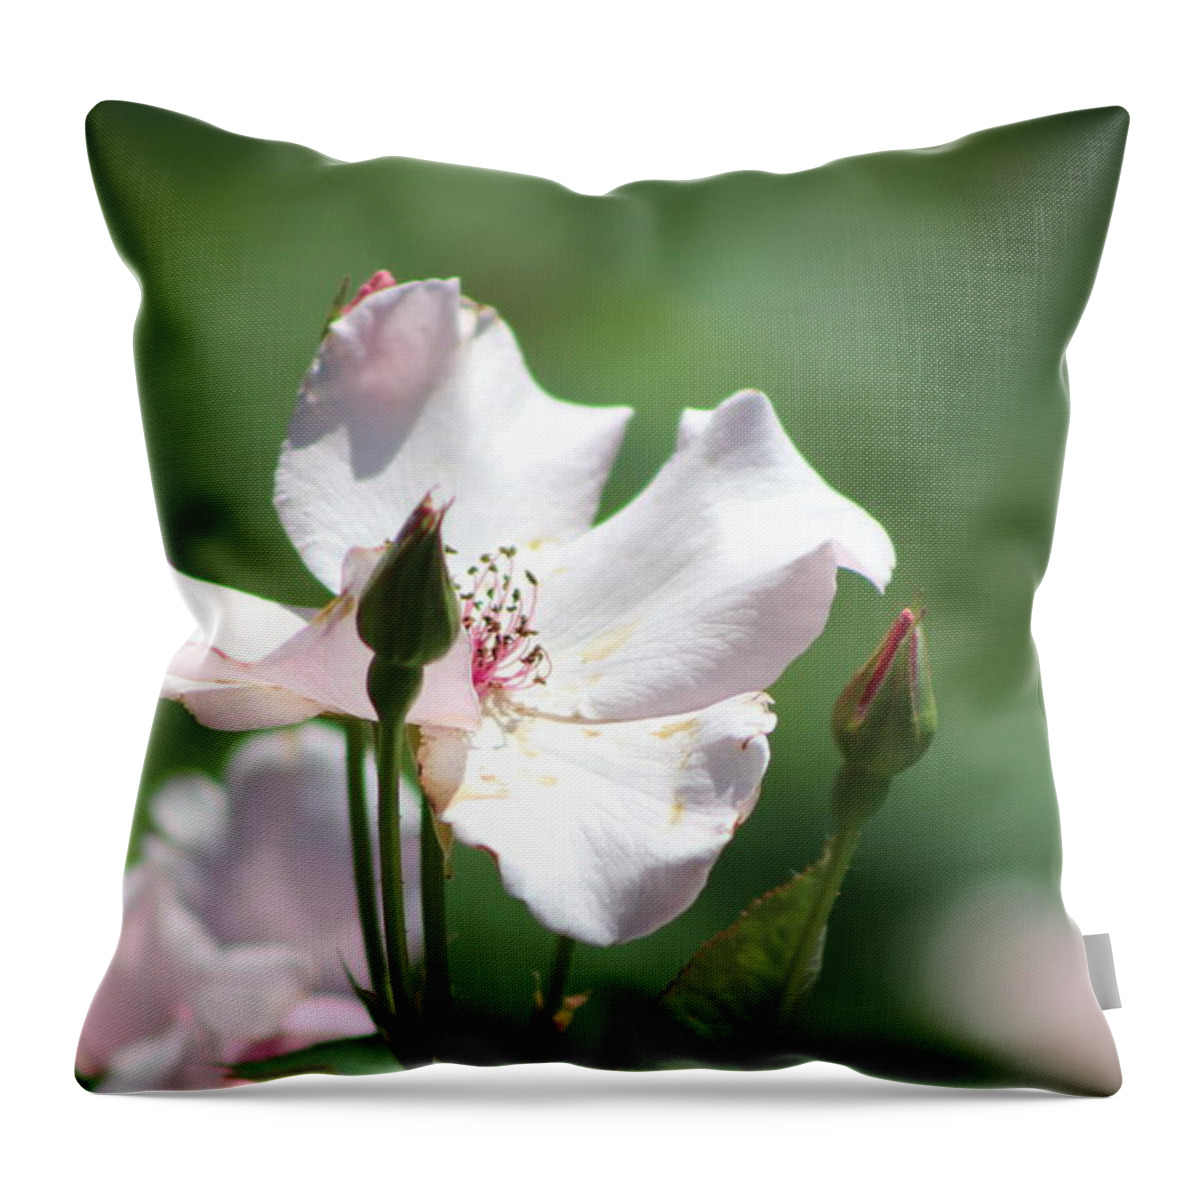 Misty Throw Pillow featuring the photograph Single Classic Pink Country Rose and Buds by Colleen Cornelius